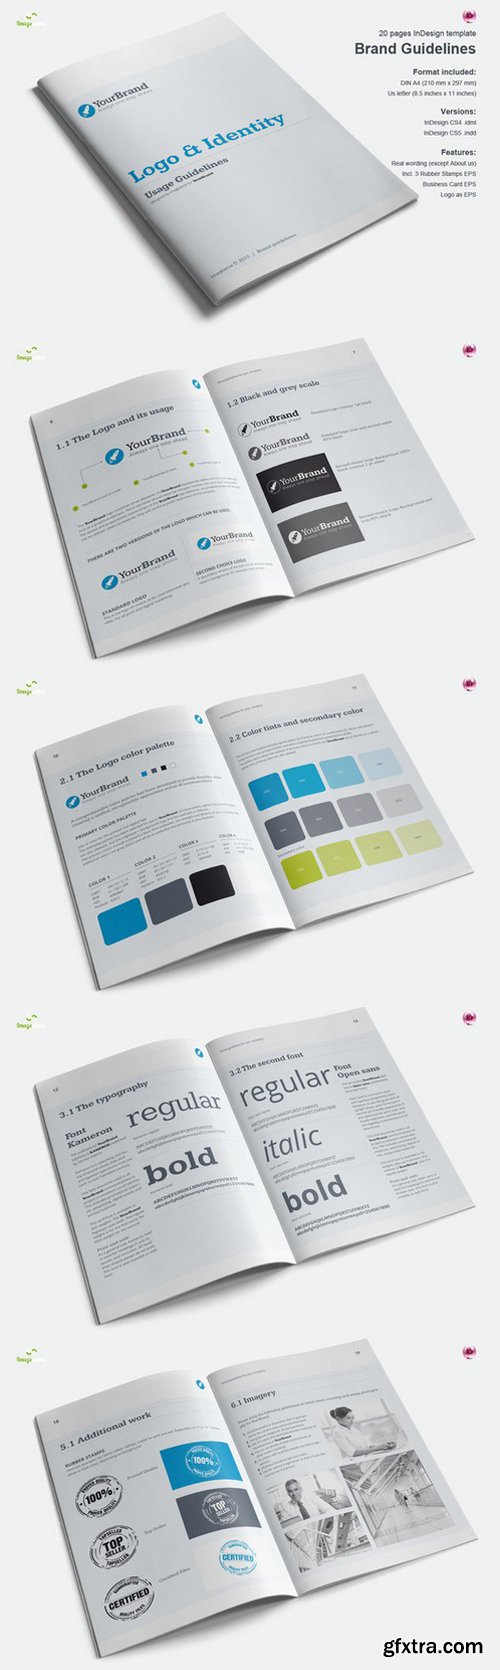 CM - Brand Guidelines 20 Pages 217946